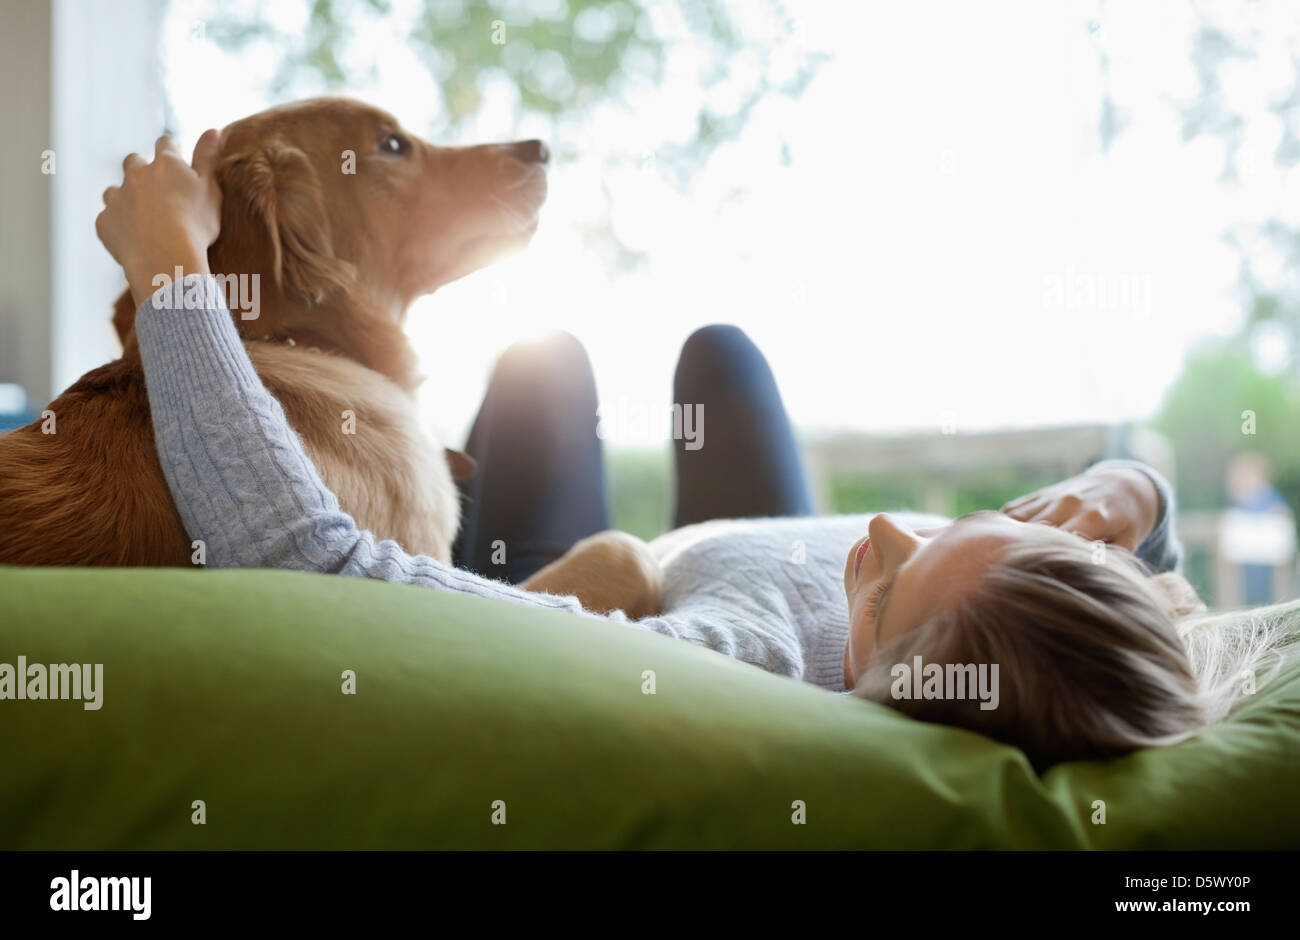 Woman petting dog on bed Banque D'Images